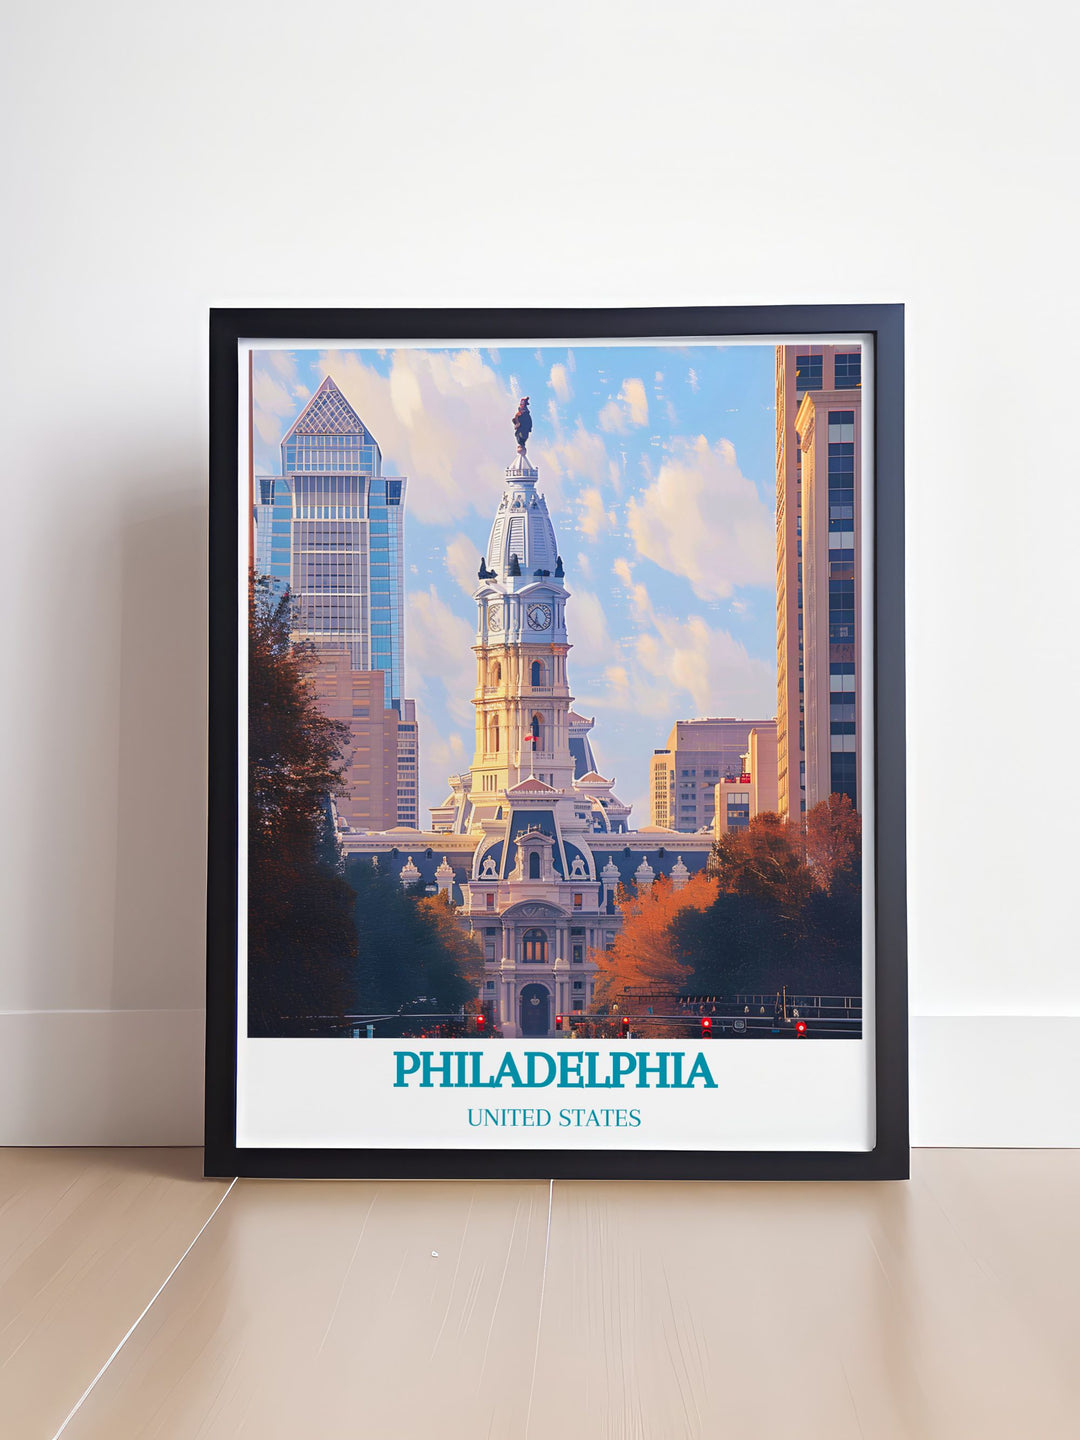 Uncover the stories and events that have shaped Philadelphia City Hall with this art print, depicting its architectural beauty and cultural heritage.